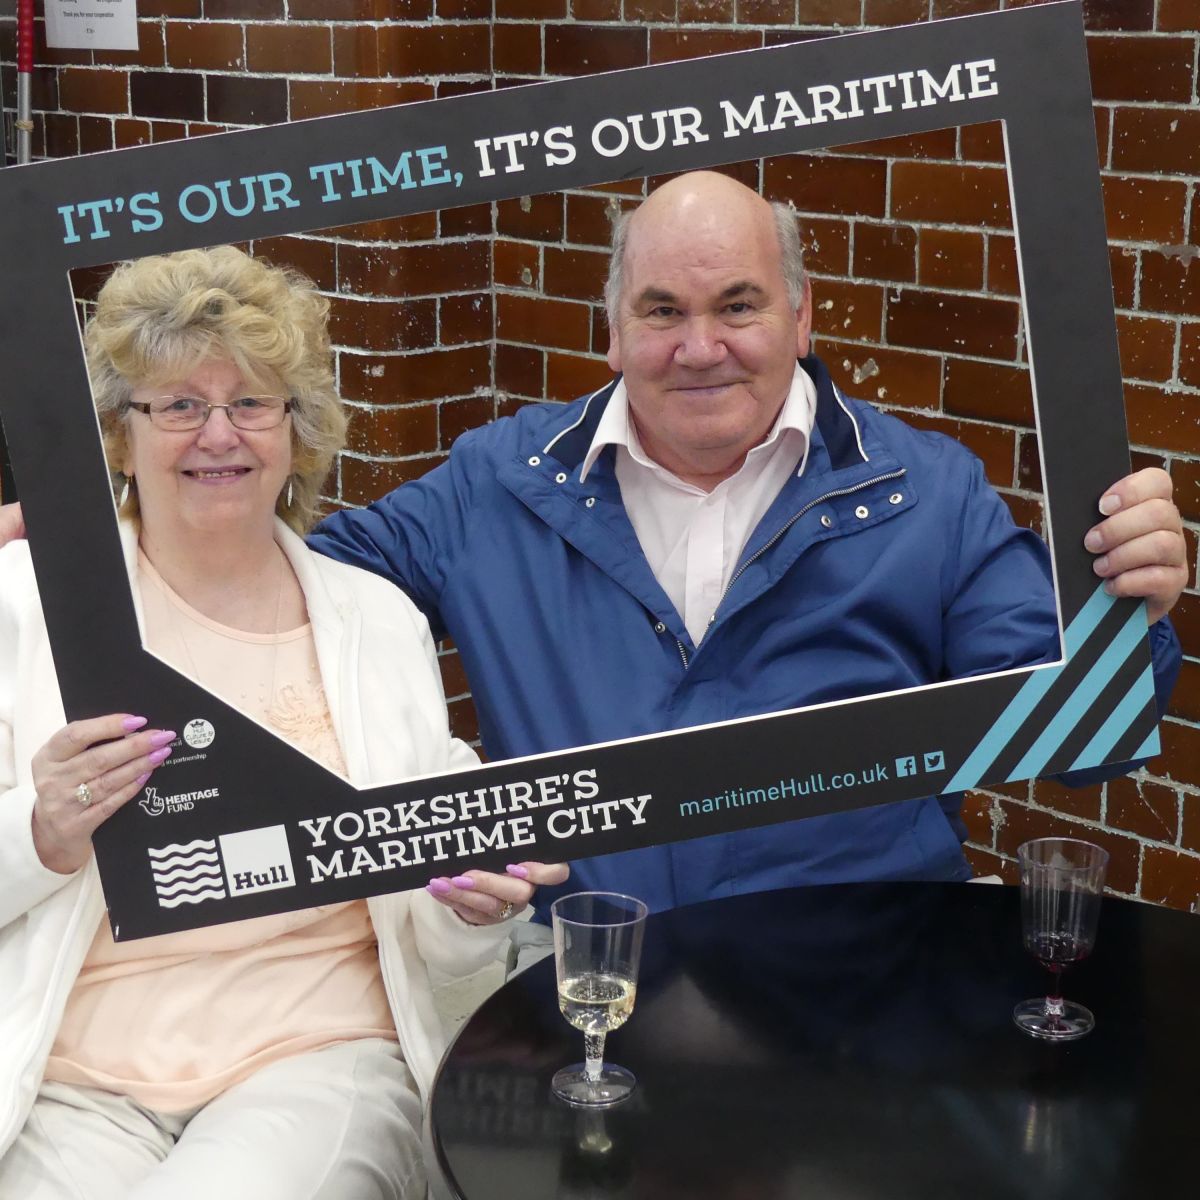 Project supporters pose in the maritime selfie frame